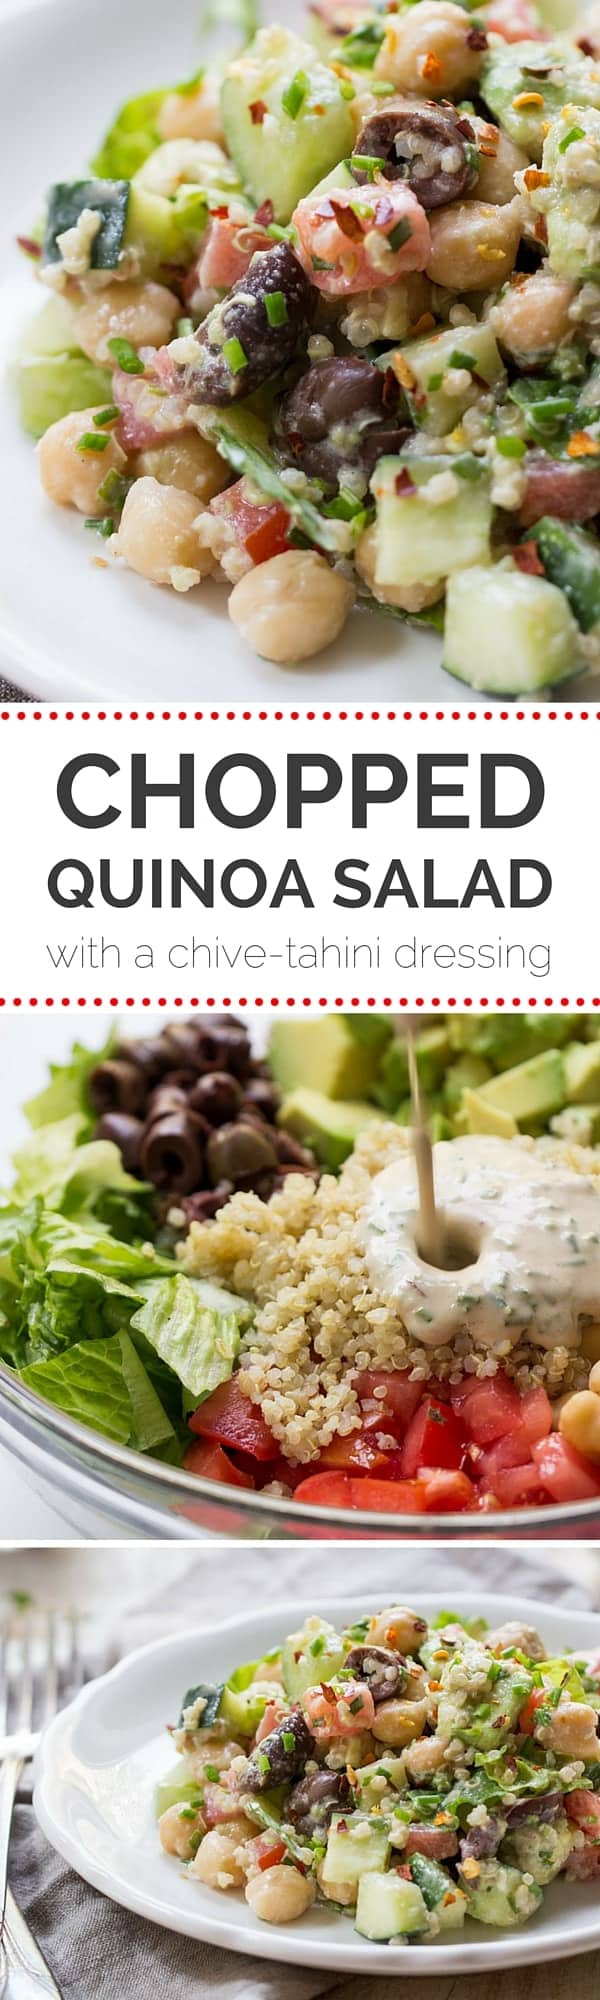 This AMAZING Chopped Quinoa Salad is made with fresh veggies, olives and chickpeas, and is tossed with a creamy Chive-Tahini Dressing | recipe on simplyquinoa.com